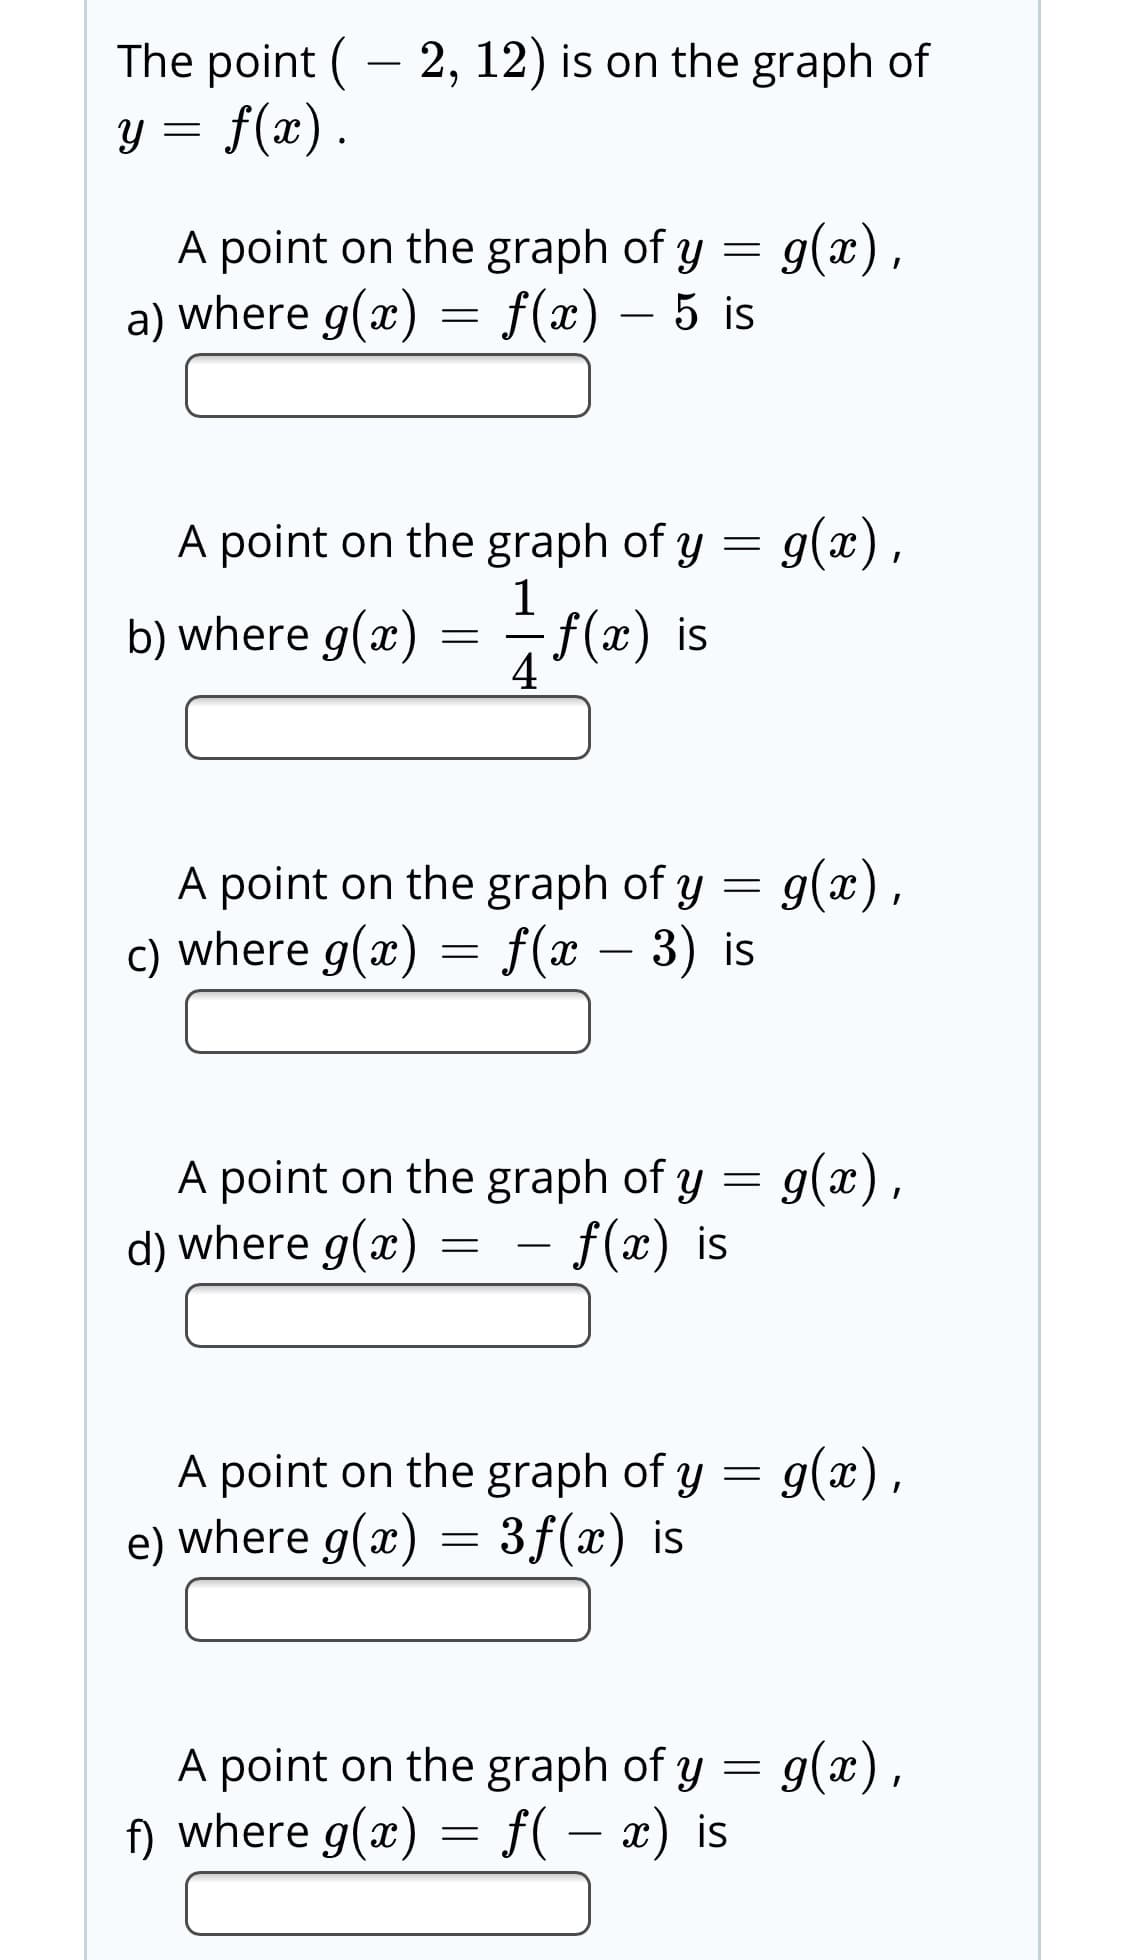 The point ( - 2, 12) is on the graph of
f(x) .
A point on the graph of y = 9(x),
a) where g(x) = f(x) – 5 is
g(x),
A point on the graph of y
f(x) is
4
b) where g(x
A point on the graph of y = g(x),
c) where g(x) = f(x – 3) is
A point on the graph of y = g(x),
d) where g(x)
f(x) is
A point on the graph of y = g(x),
e) where g(x) = 3f(x) is
g(x),
A point on the graph of y =
f) where g(x) = f( – x) is
